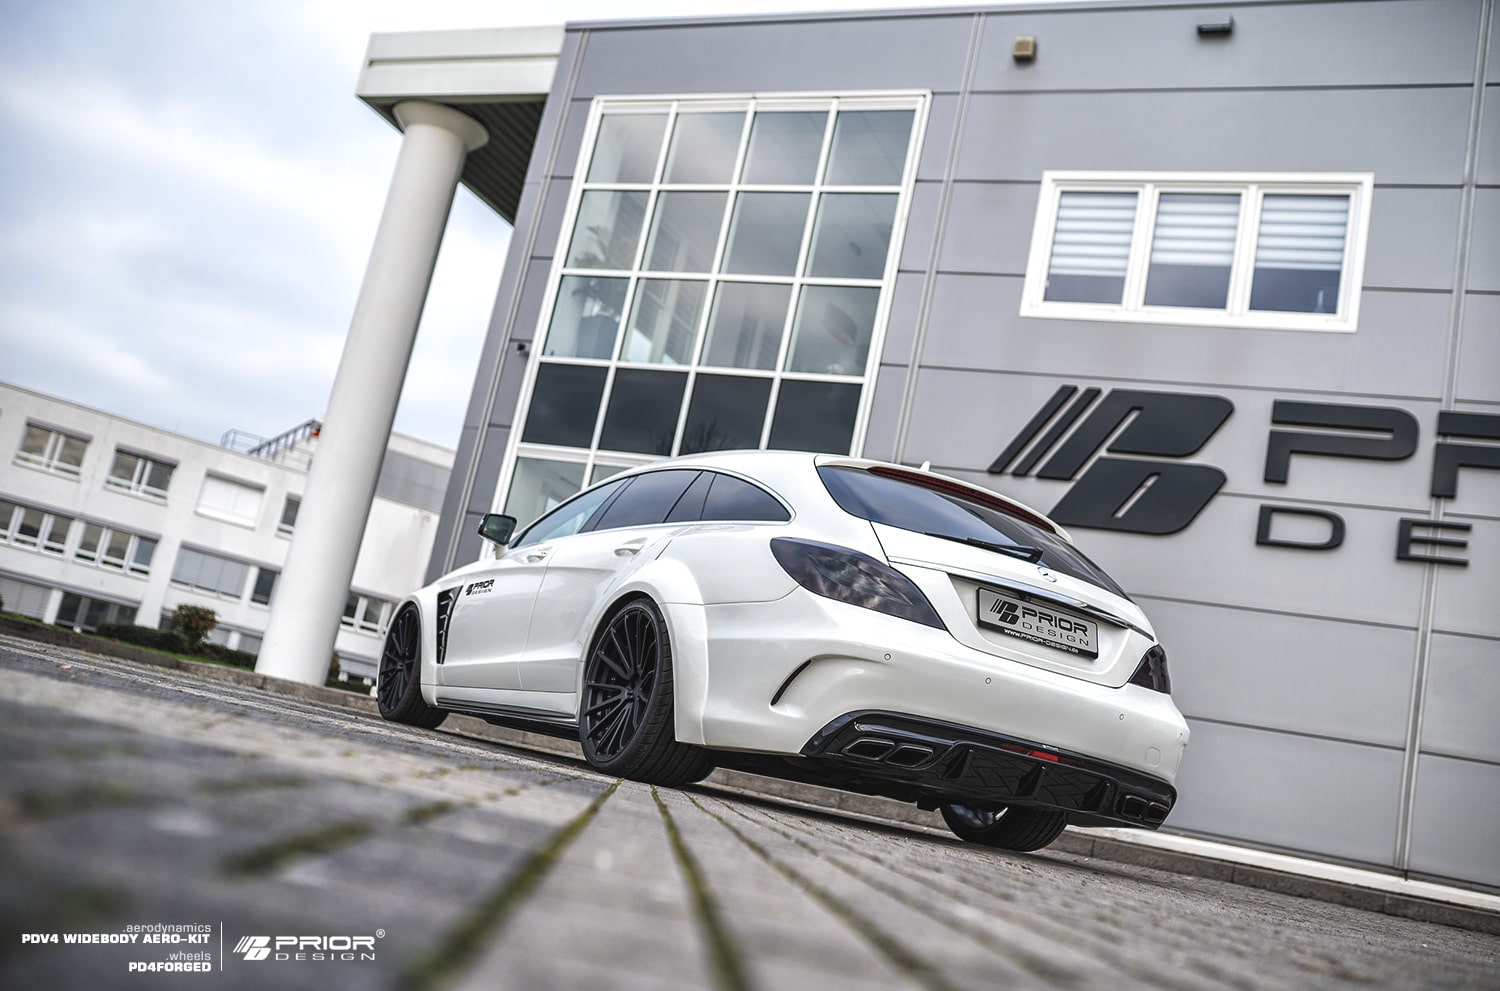 PDV4 Widebody Front & Rear Widenings for Mercedes CLS X218 Shooting Brake